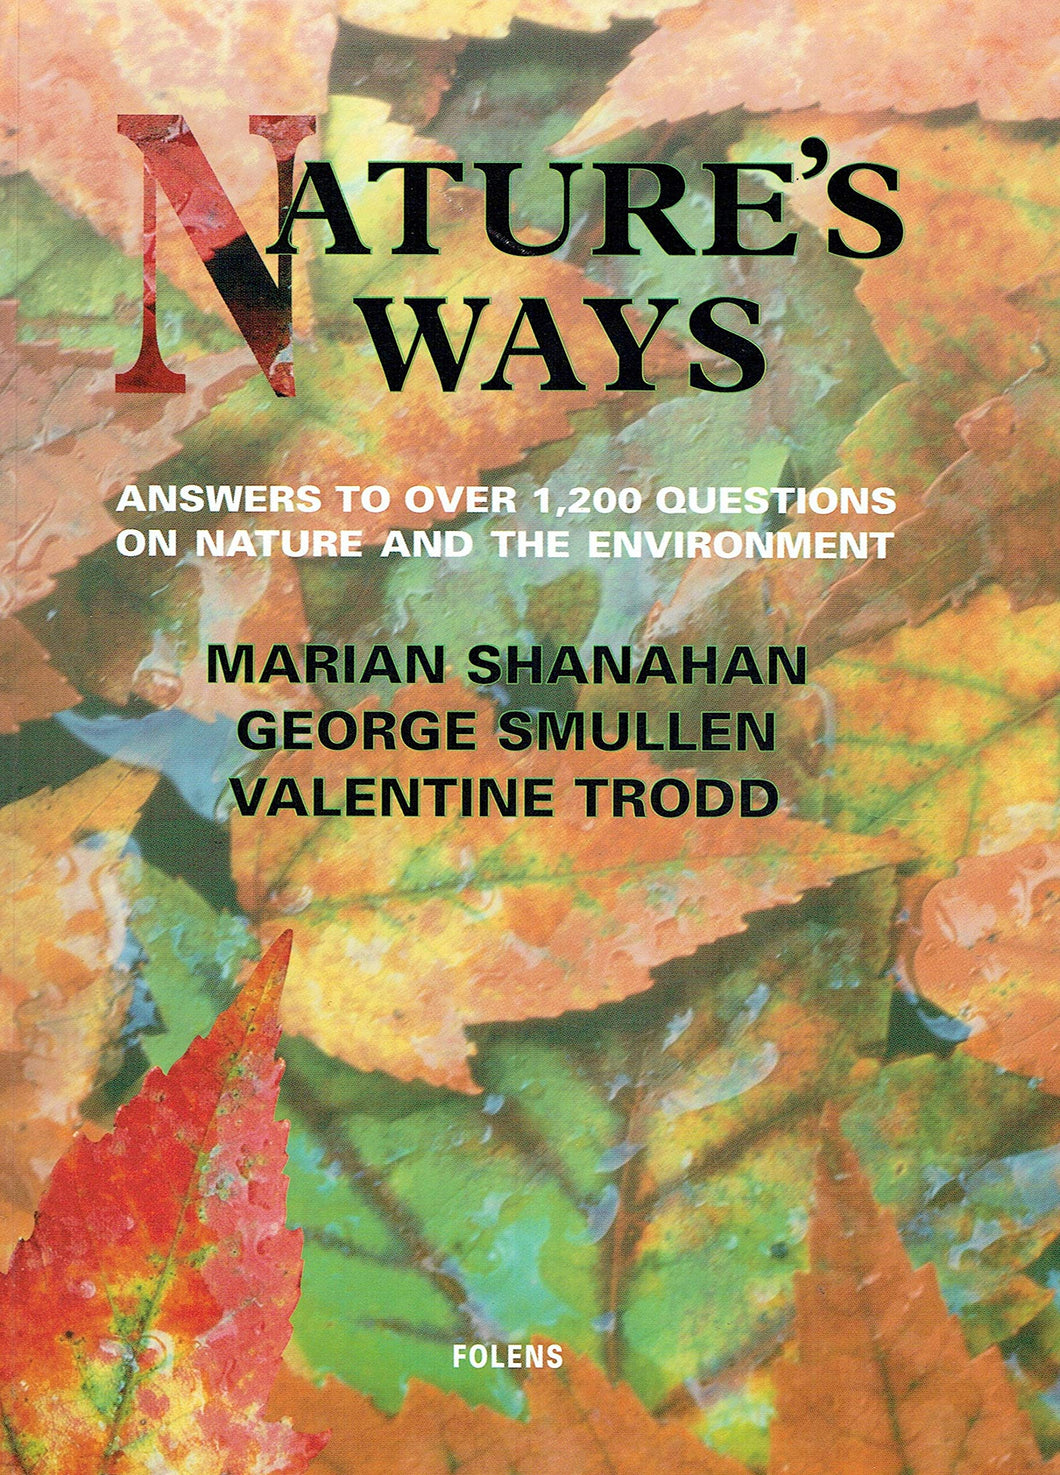 Nature's Ways: Answers to Over 1,200 Questions on Nature and the Environment